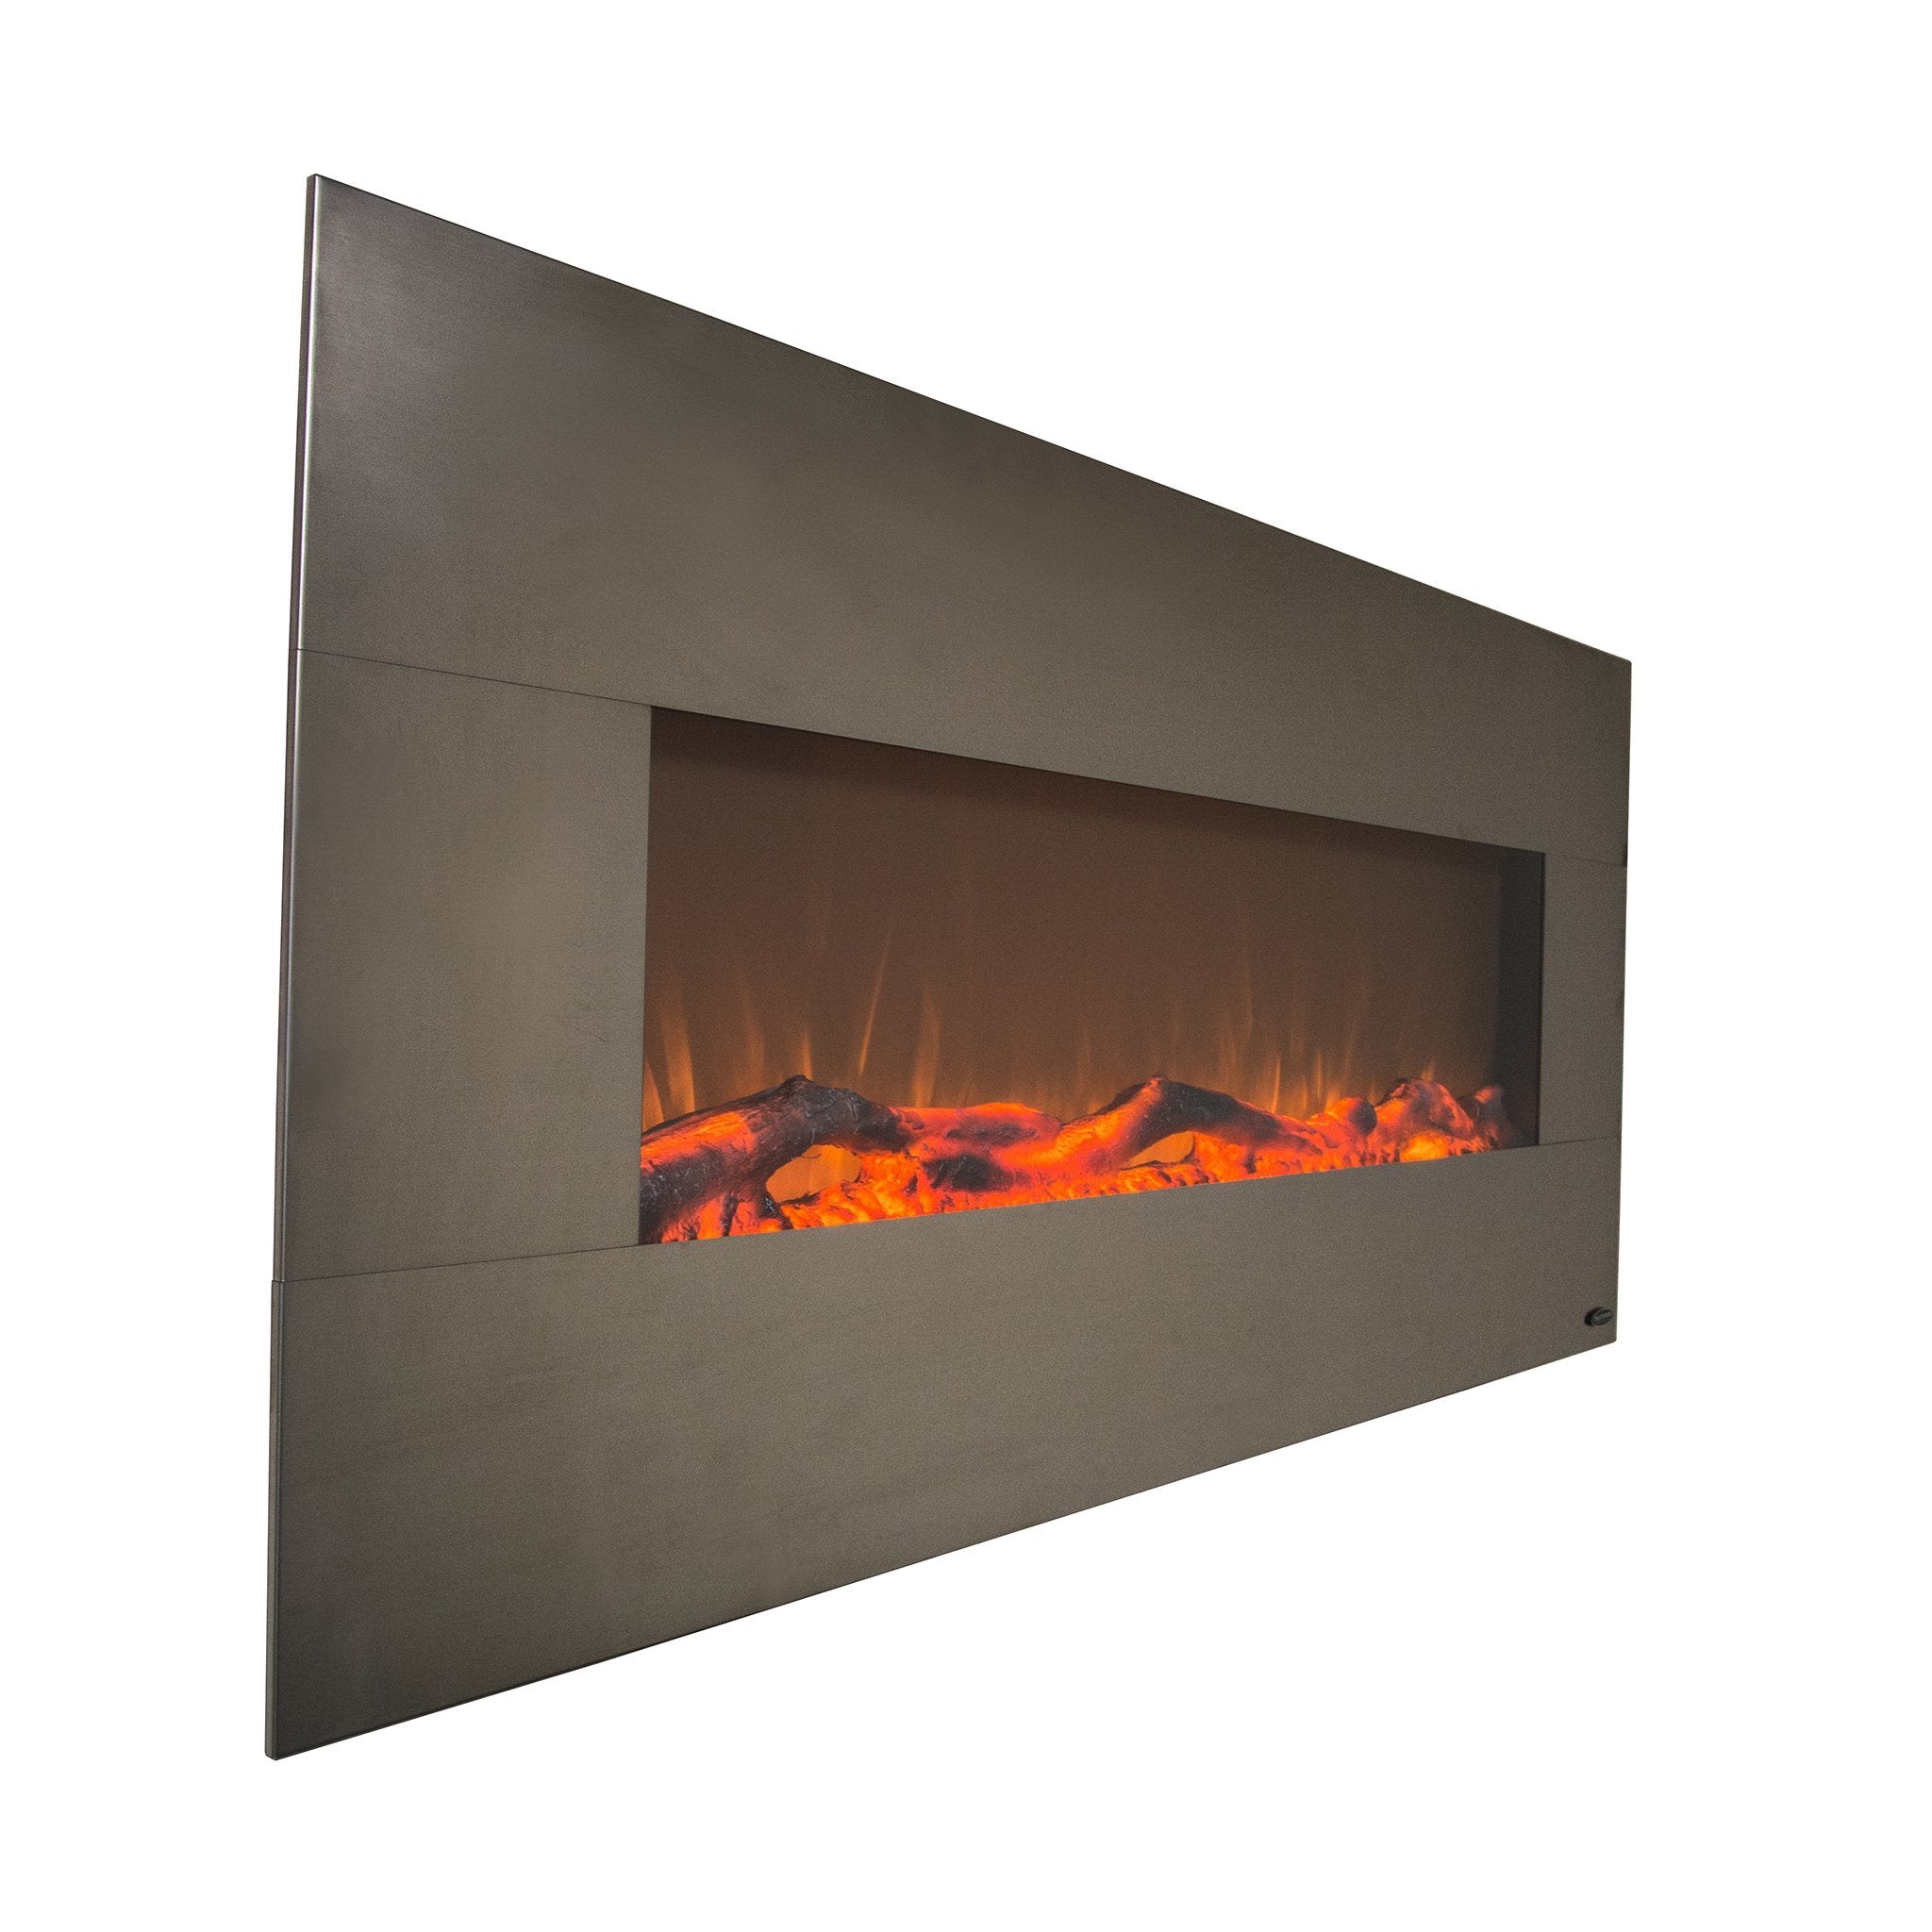 Onyx Stainless 80026  Refurbished Wall Mounted Electric Fireplace - angle view.